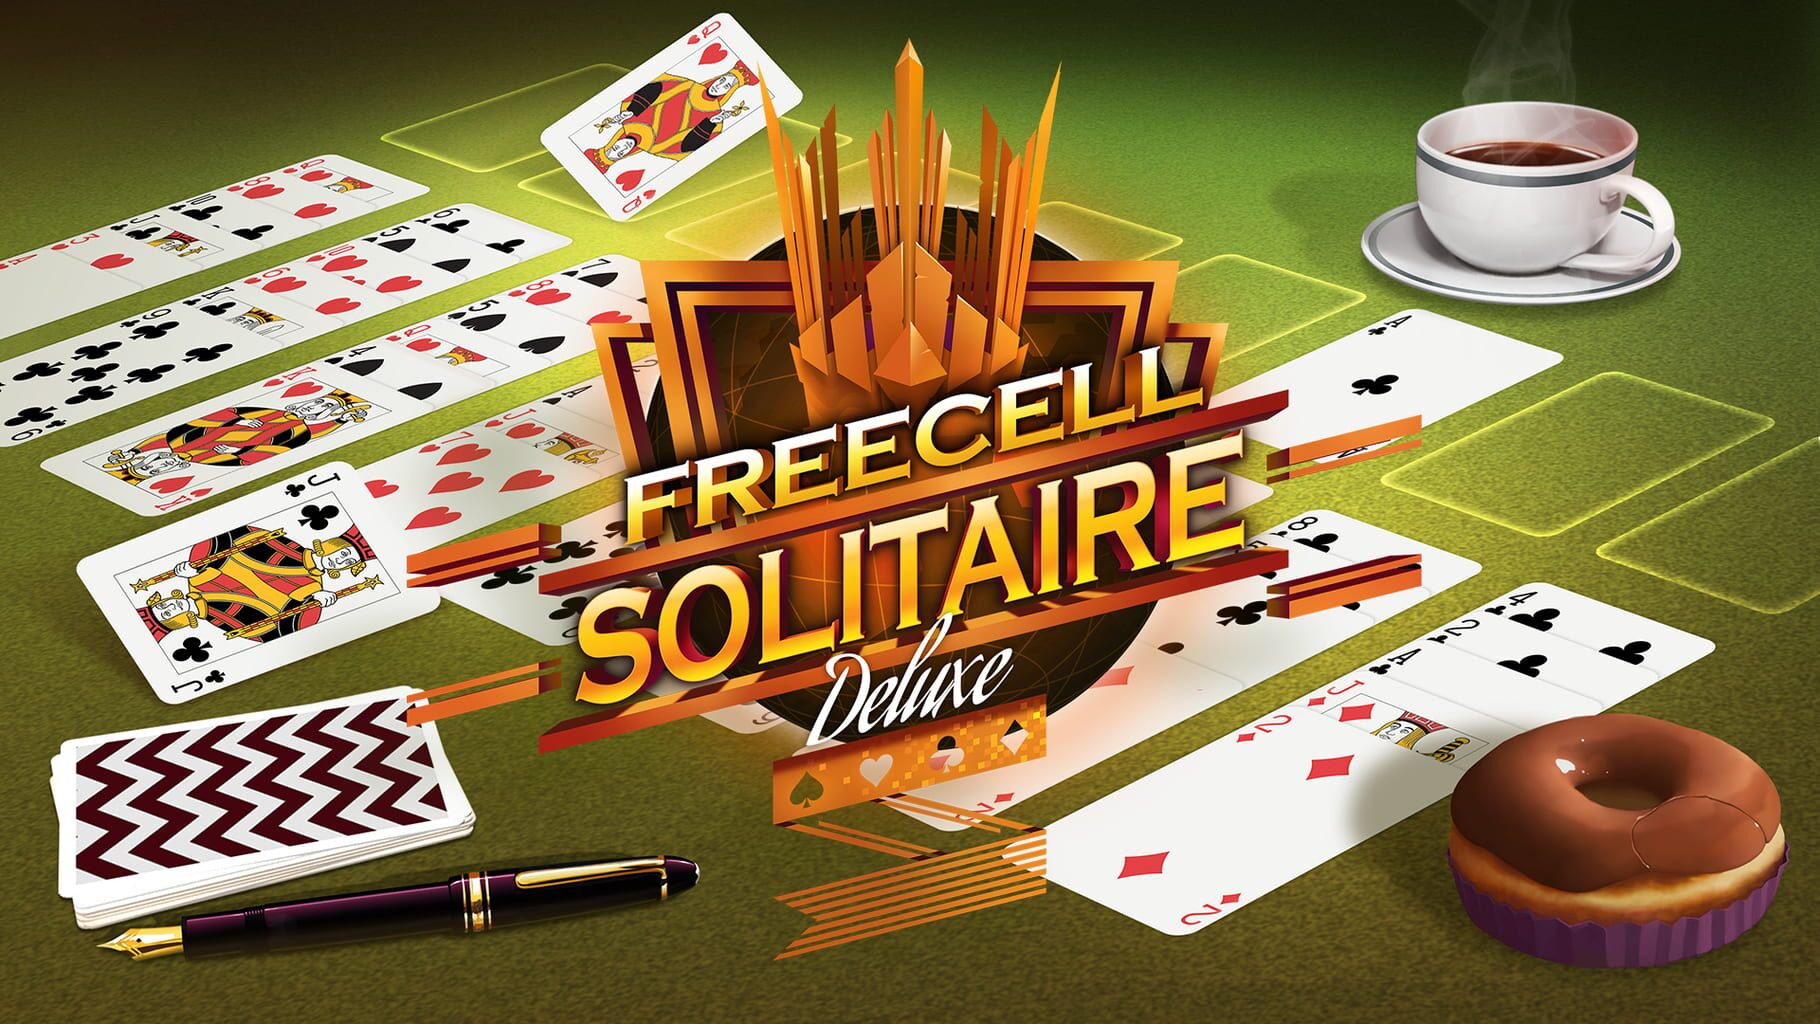 Freecell Solitaire Deluxe artwork